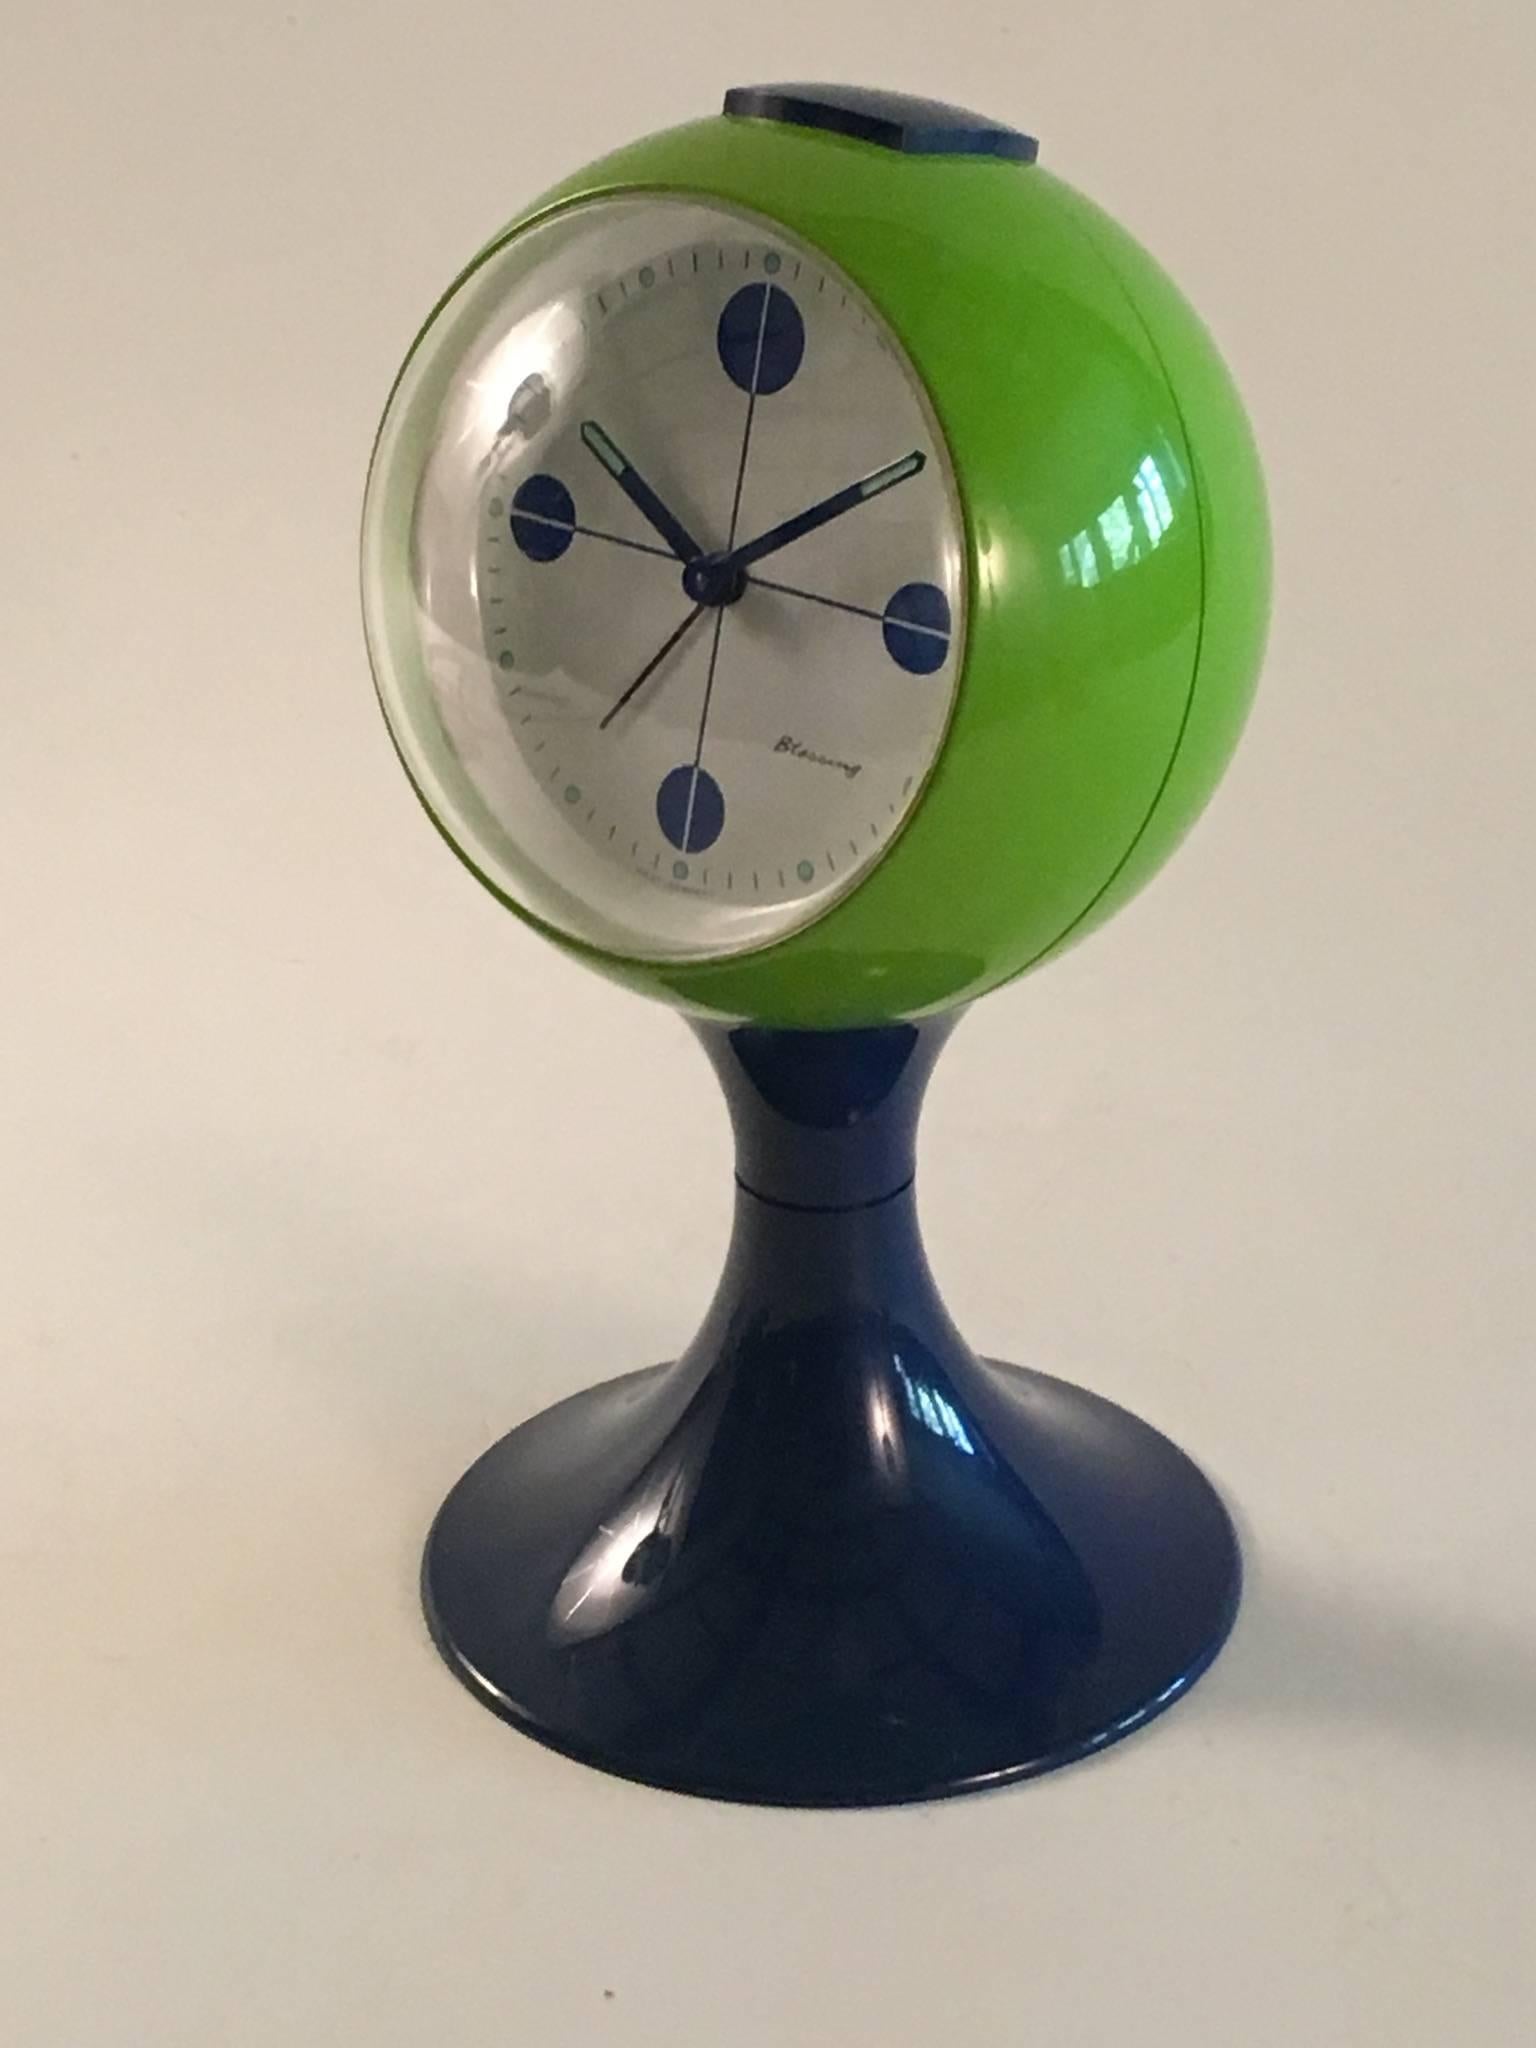 A good Blessing mechanical pedestal clock from the 'space race' era of the late 1960s. In excellent condition complete with its back cover plate over the winding knobs. The blue and green plastic is bright and shiny without any blemishes and it